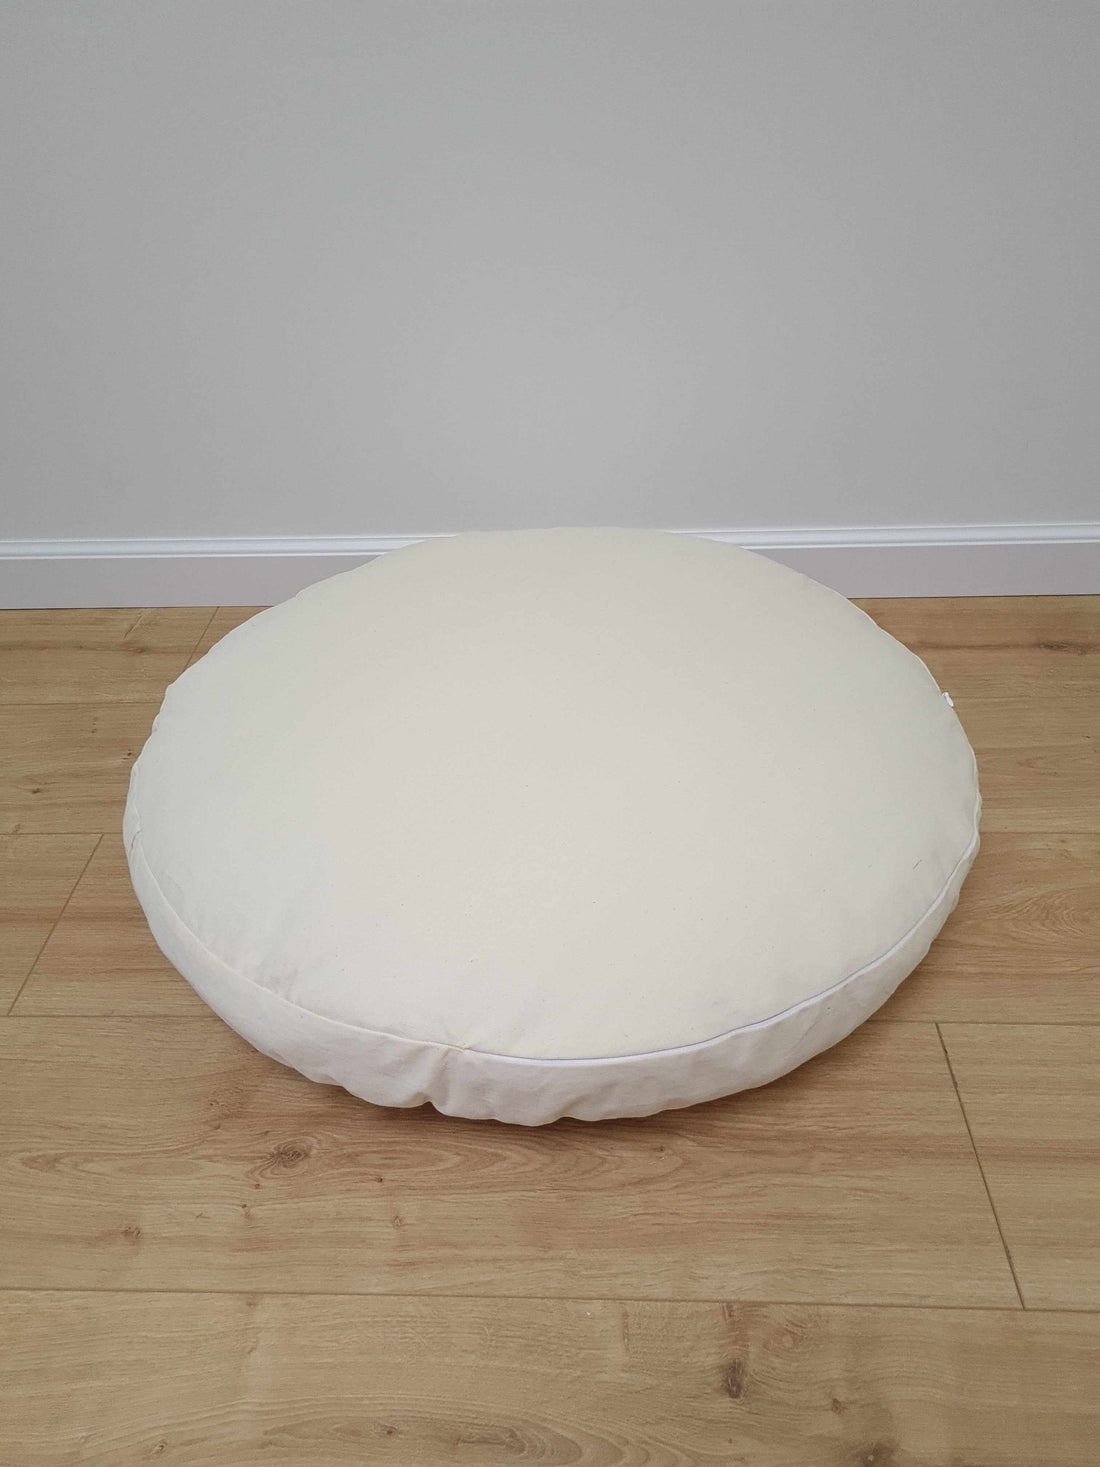 Round Hemp cotton cushion with removable cover Hemp fiber filling in cotton fabric with cotton non-dyed cover Floor cushion custom made size